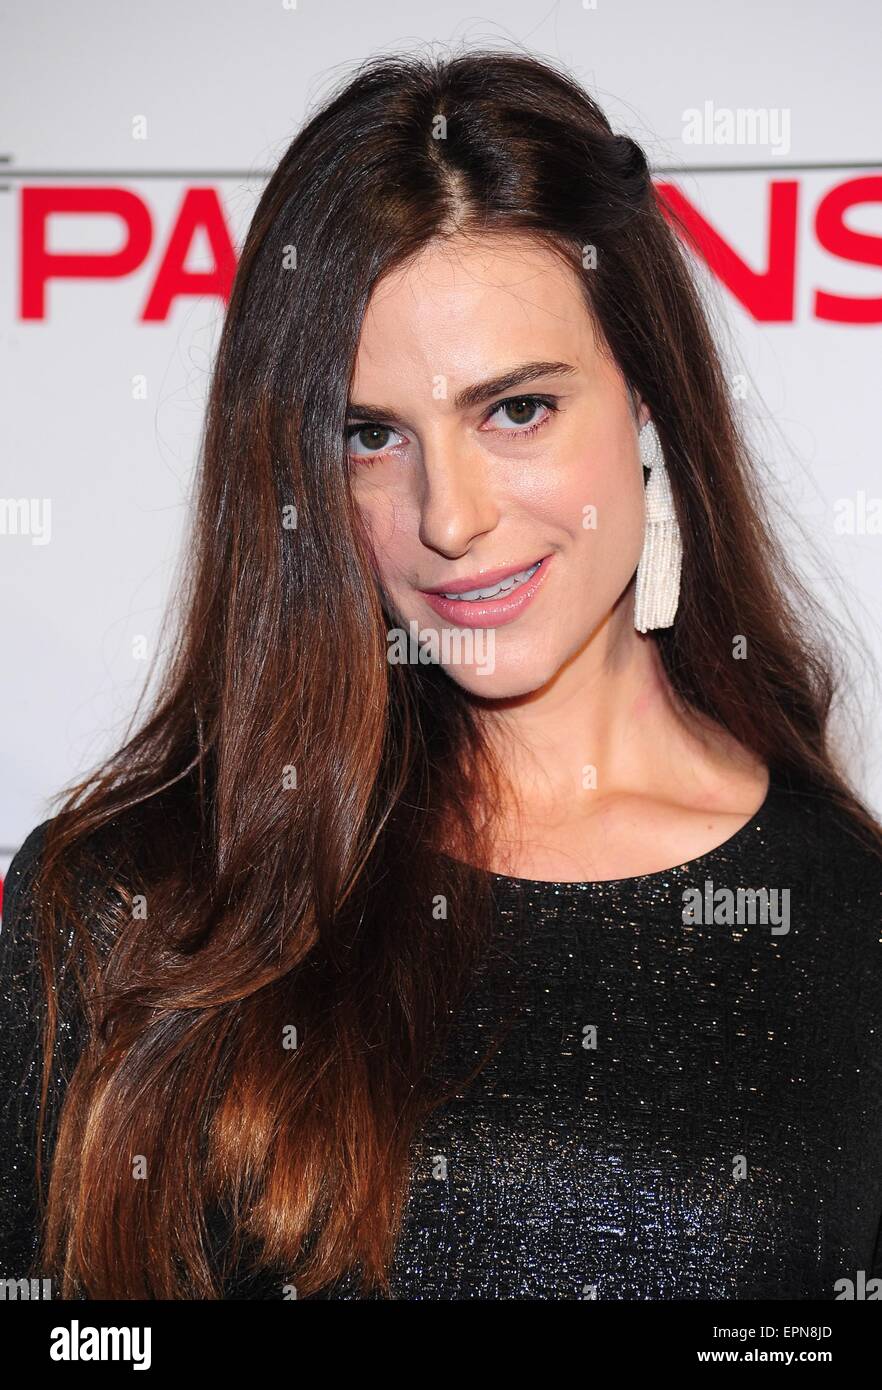 New York, NY, USA. 19th May, 2015. Ariana Rockefeller at arrivals for 67th Annual Parsons Fashion Benefit, Jacob K. Javits Convention Center, New York, NY May 19, 2015. Credit:  Gregorio T. Binuya/Everett Collection/Alamy Live News Stock Photo